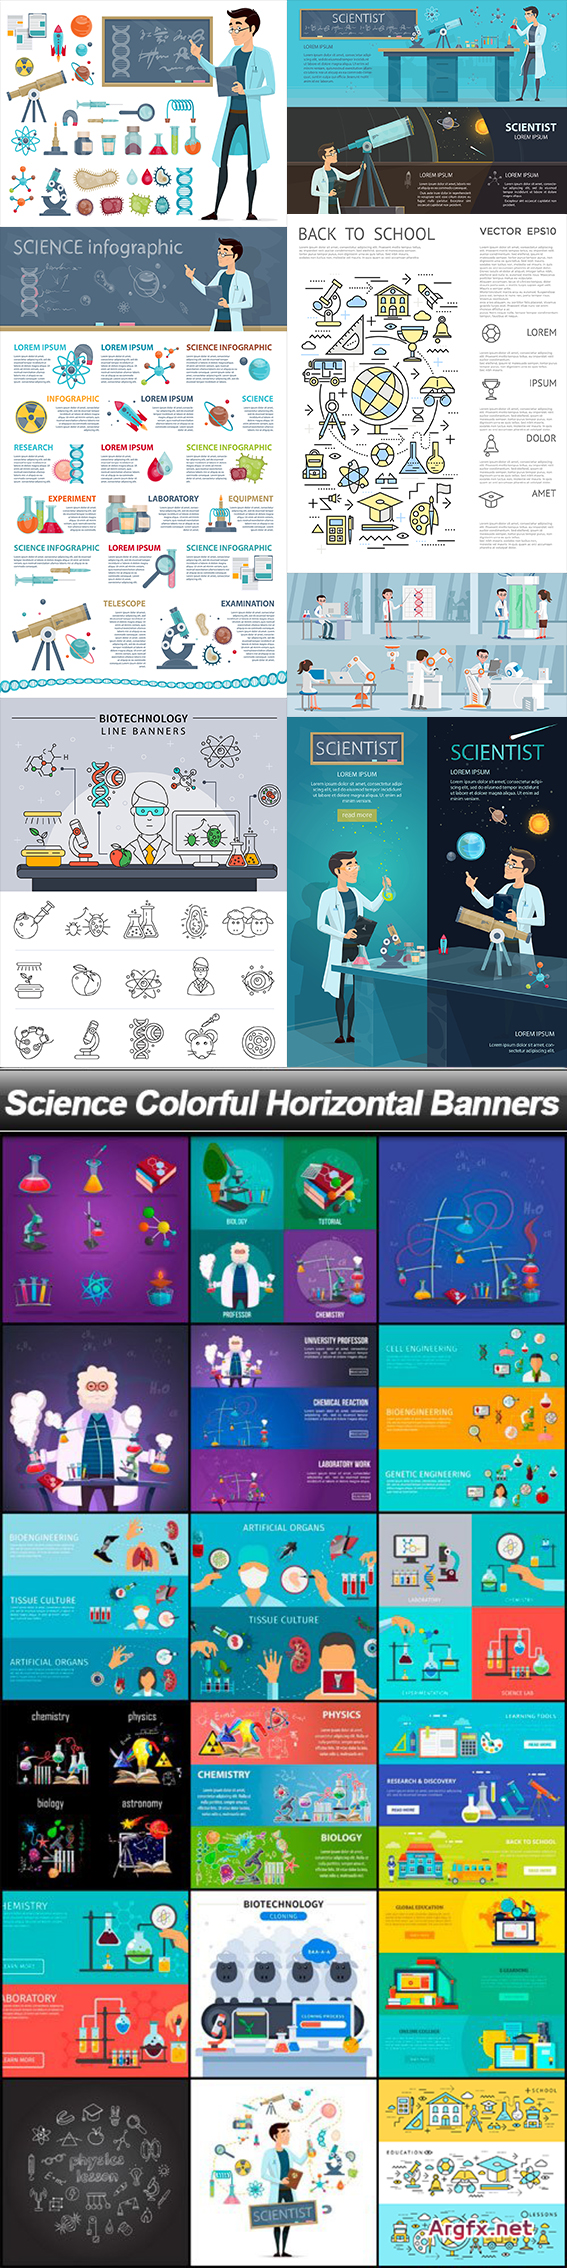 Science Colorful Horizontal Banners - 25 EPS